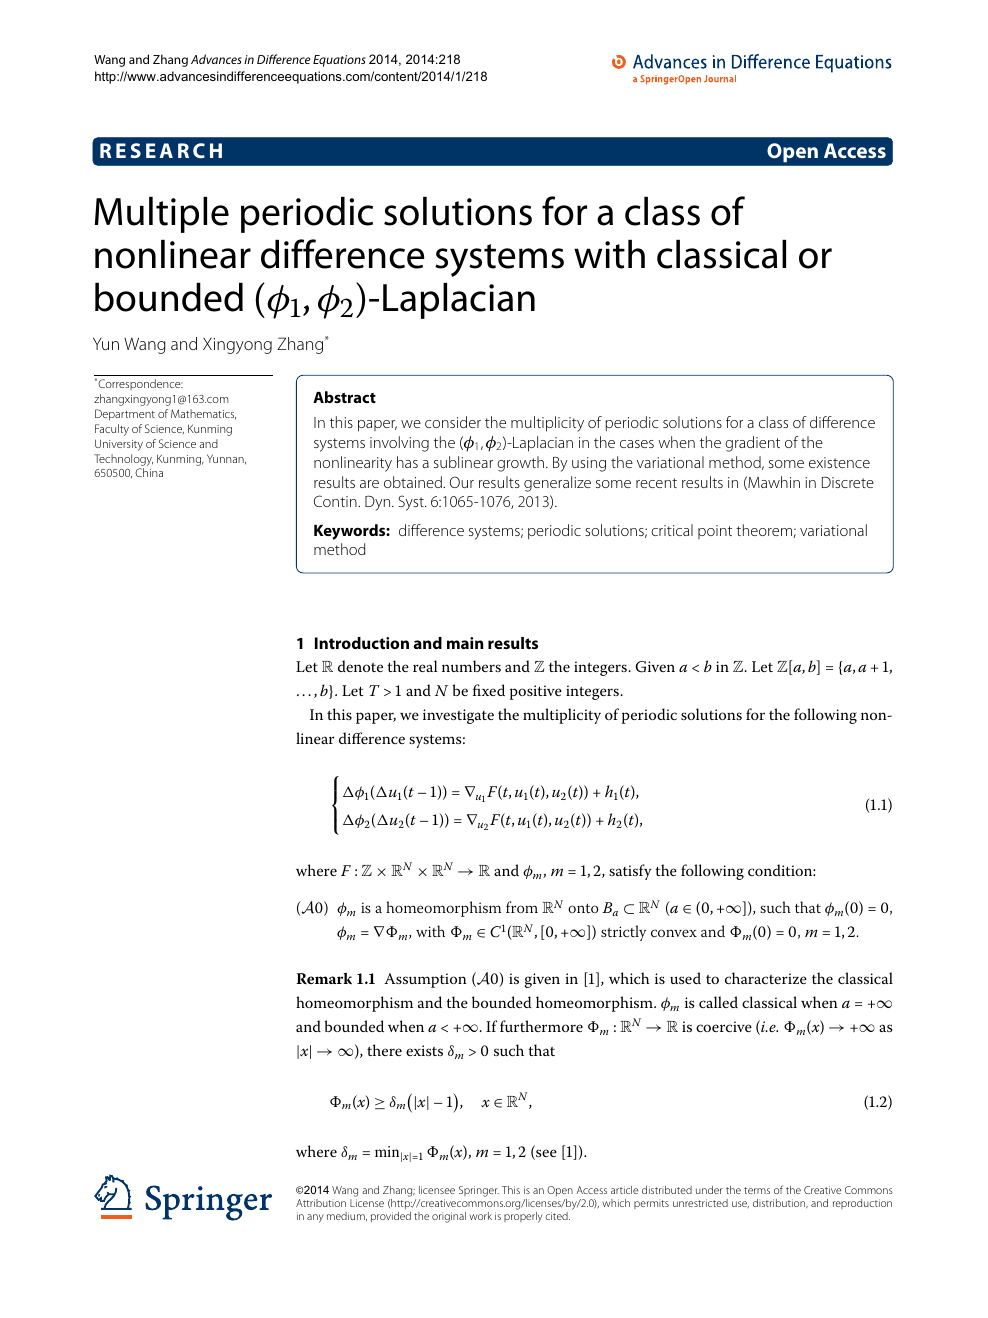 Multiple Periodic Solutions For A Class Of Nonlinear Difference Systems With Classical Or Bounded ϕ1 ϕ2 Laplacian Topic Of Research Paper In Mathematics Download Scholarly Article Pdf And Read For Free On Cyberleninka